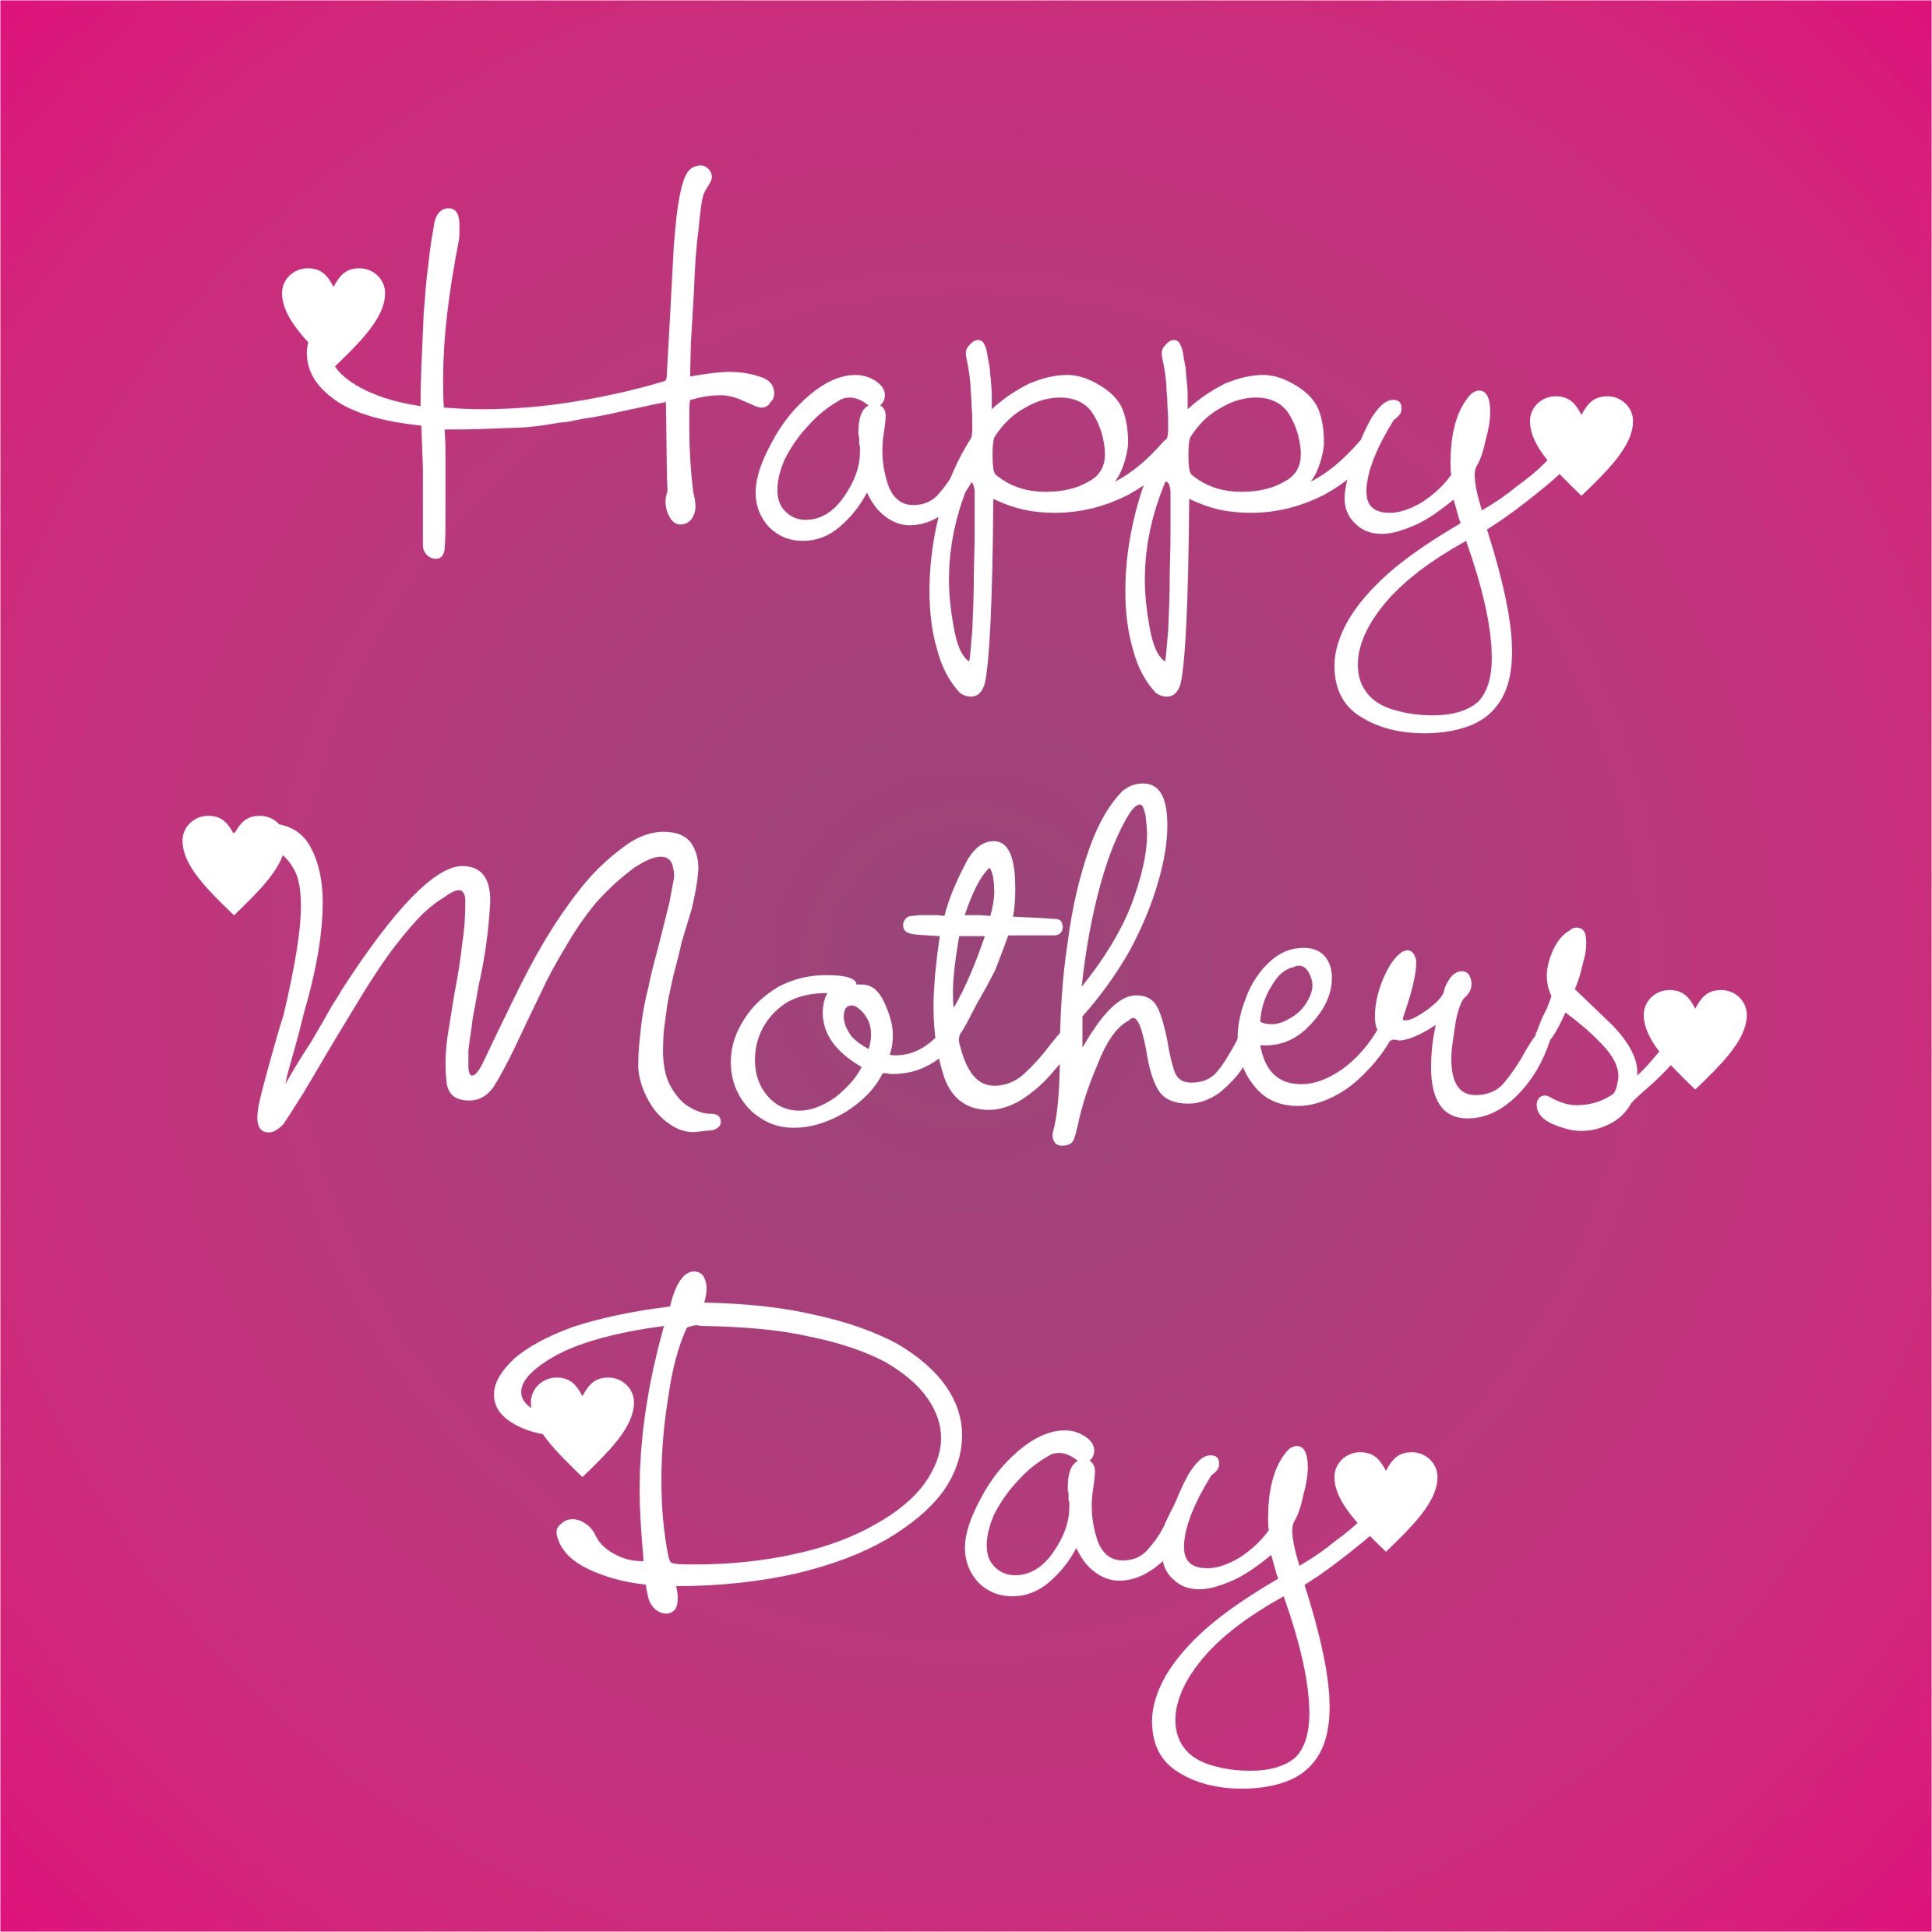 mothers, Day, Mom, Mother, Family, 1mday, Mood, Love, Holiday Wallpaper